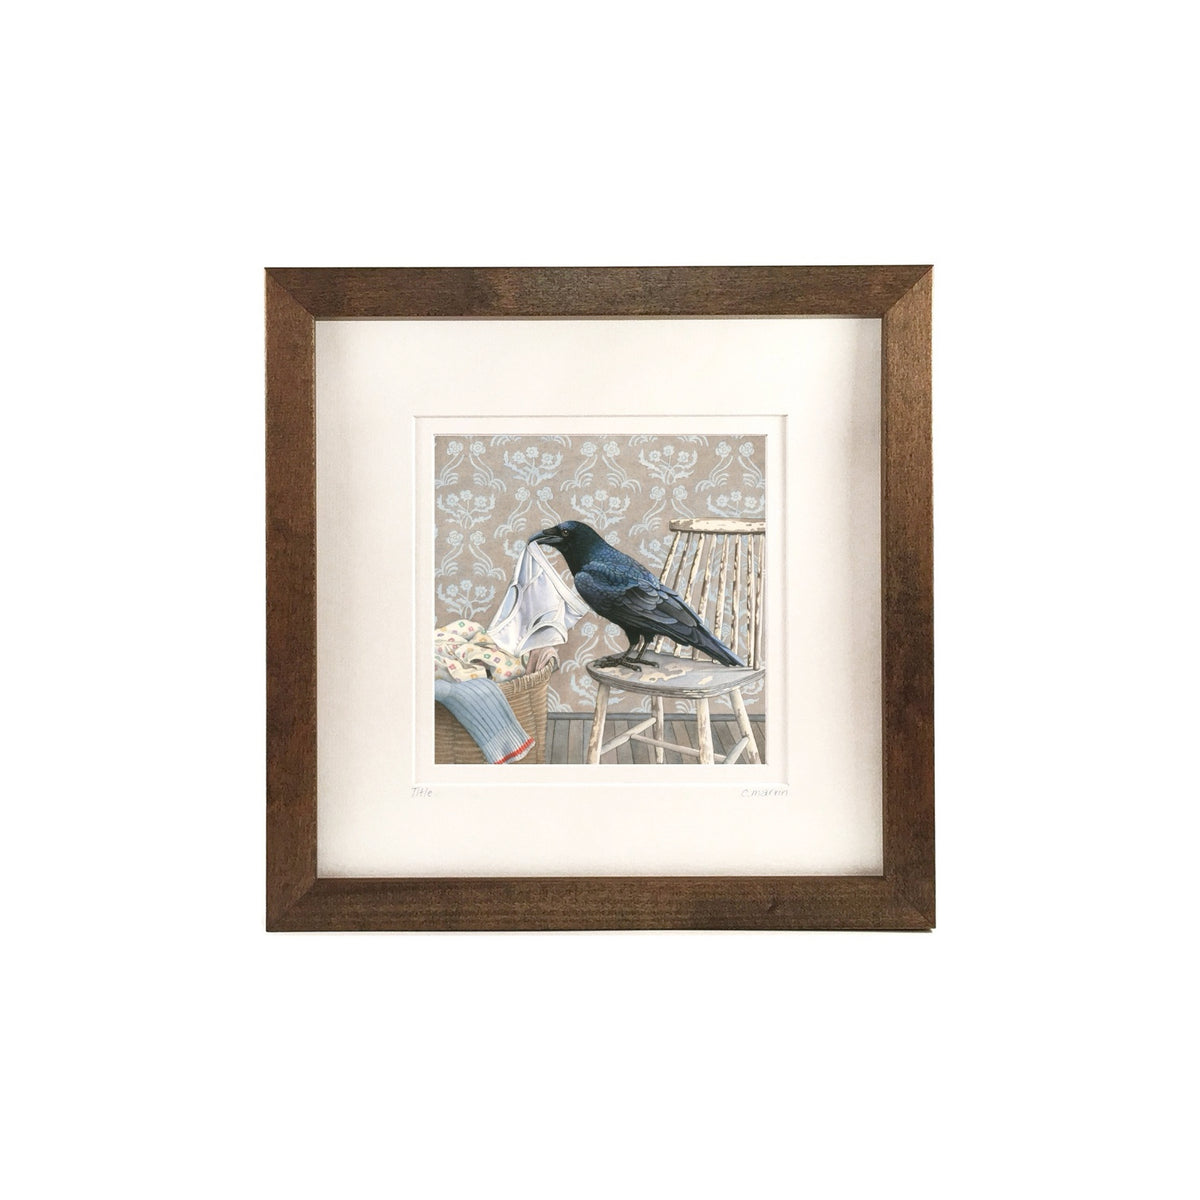 Cori Lee Marvin Framed Print- Crow gathers Nesting Material